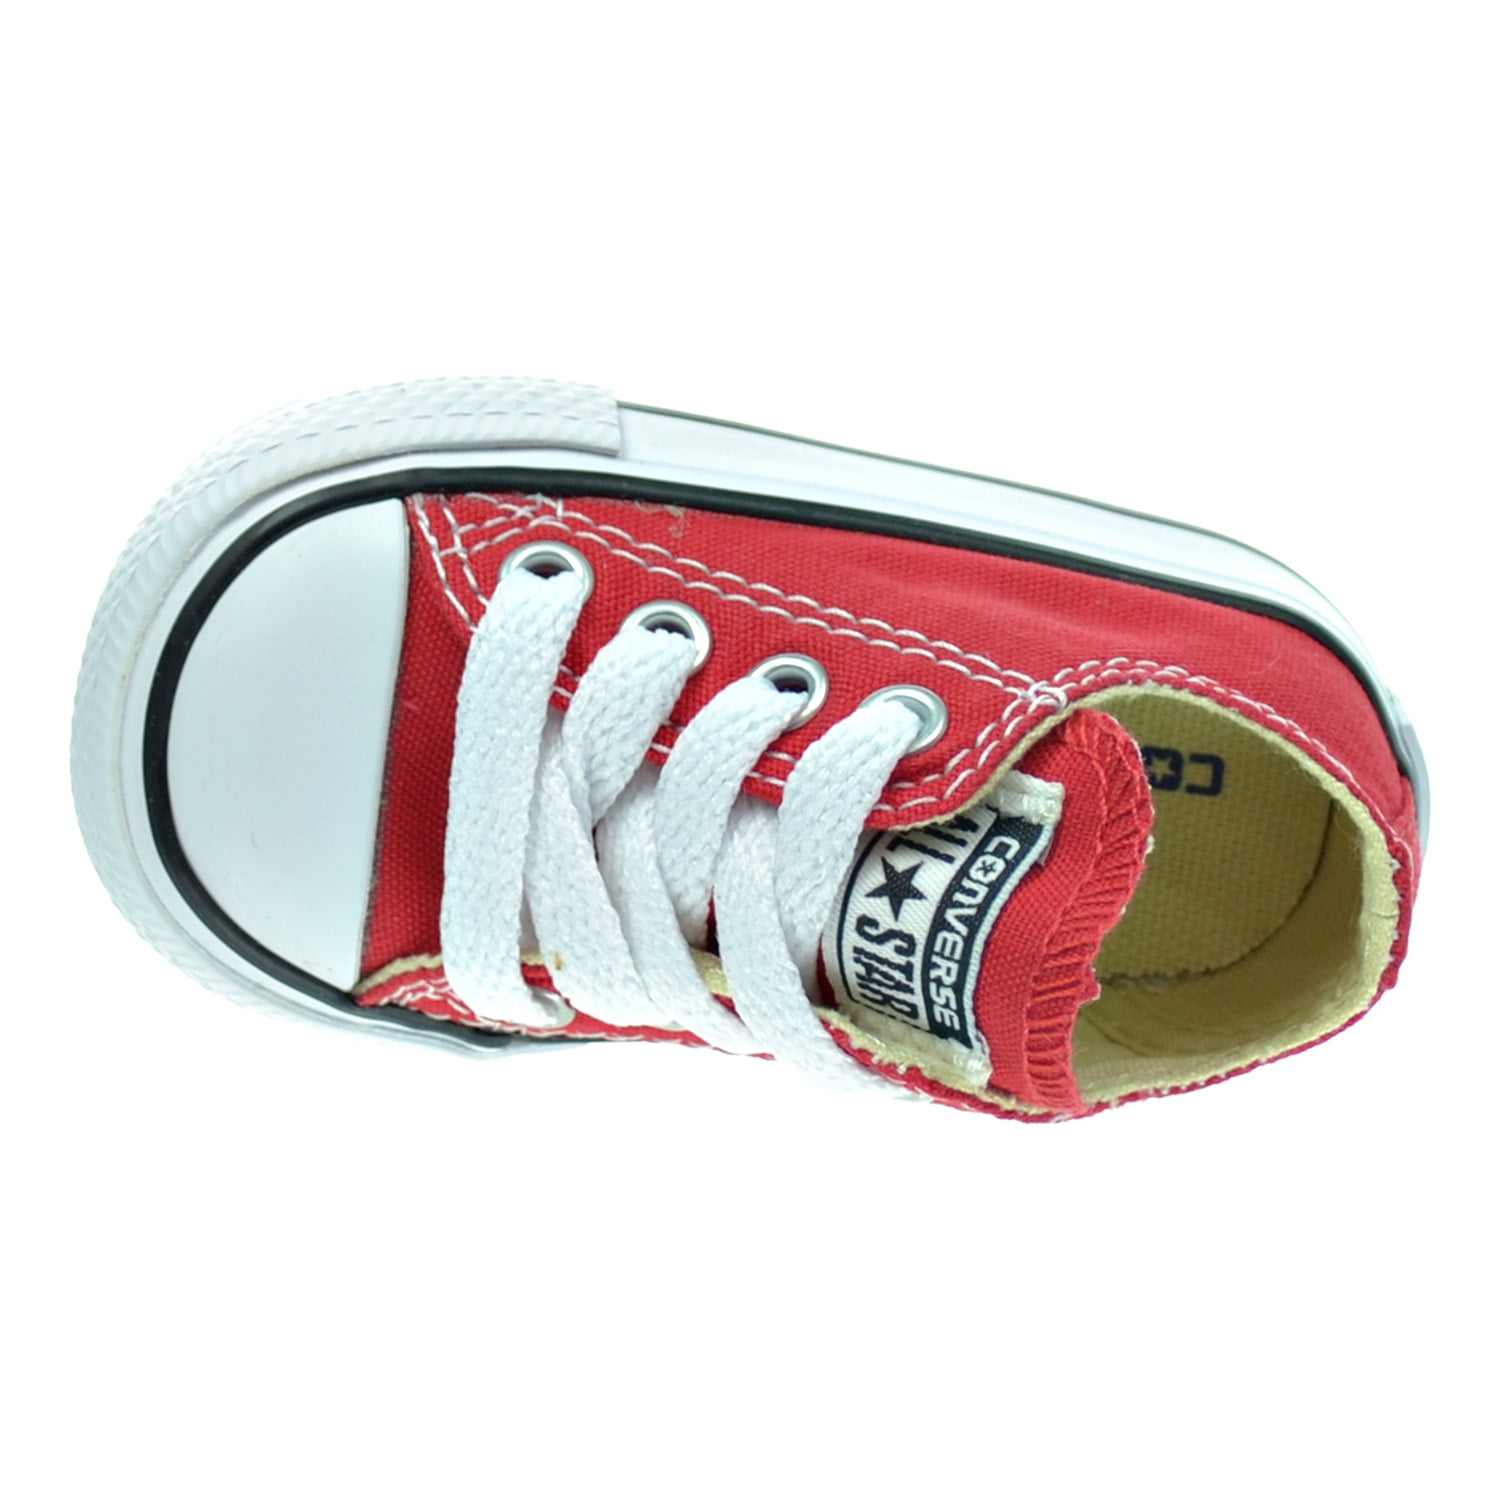 Converse Taylor All Star Low Top Shoes Red 7j236 - Walmart.com